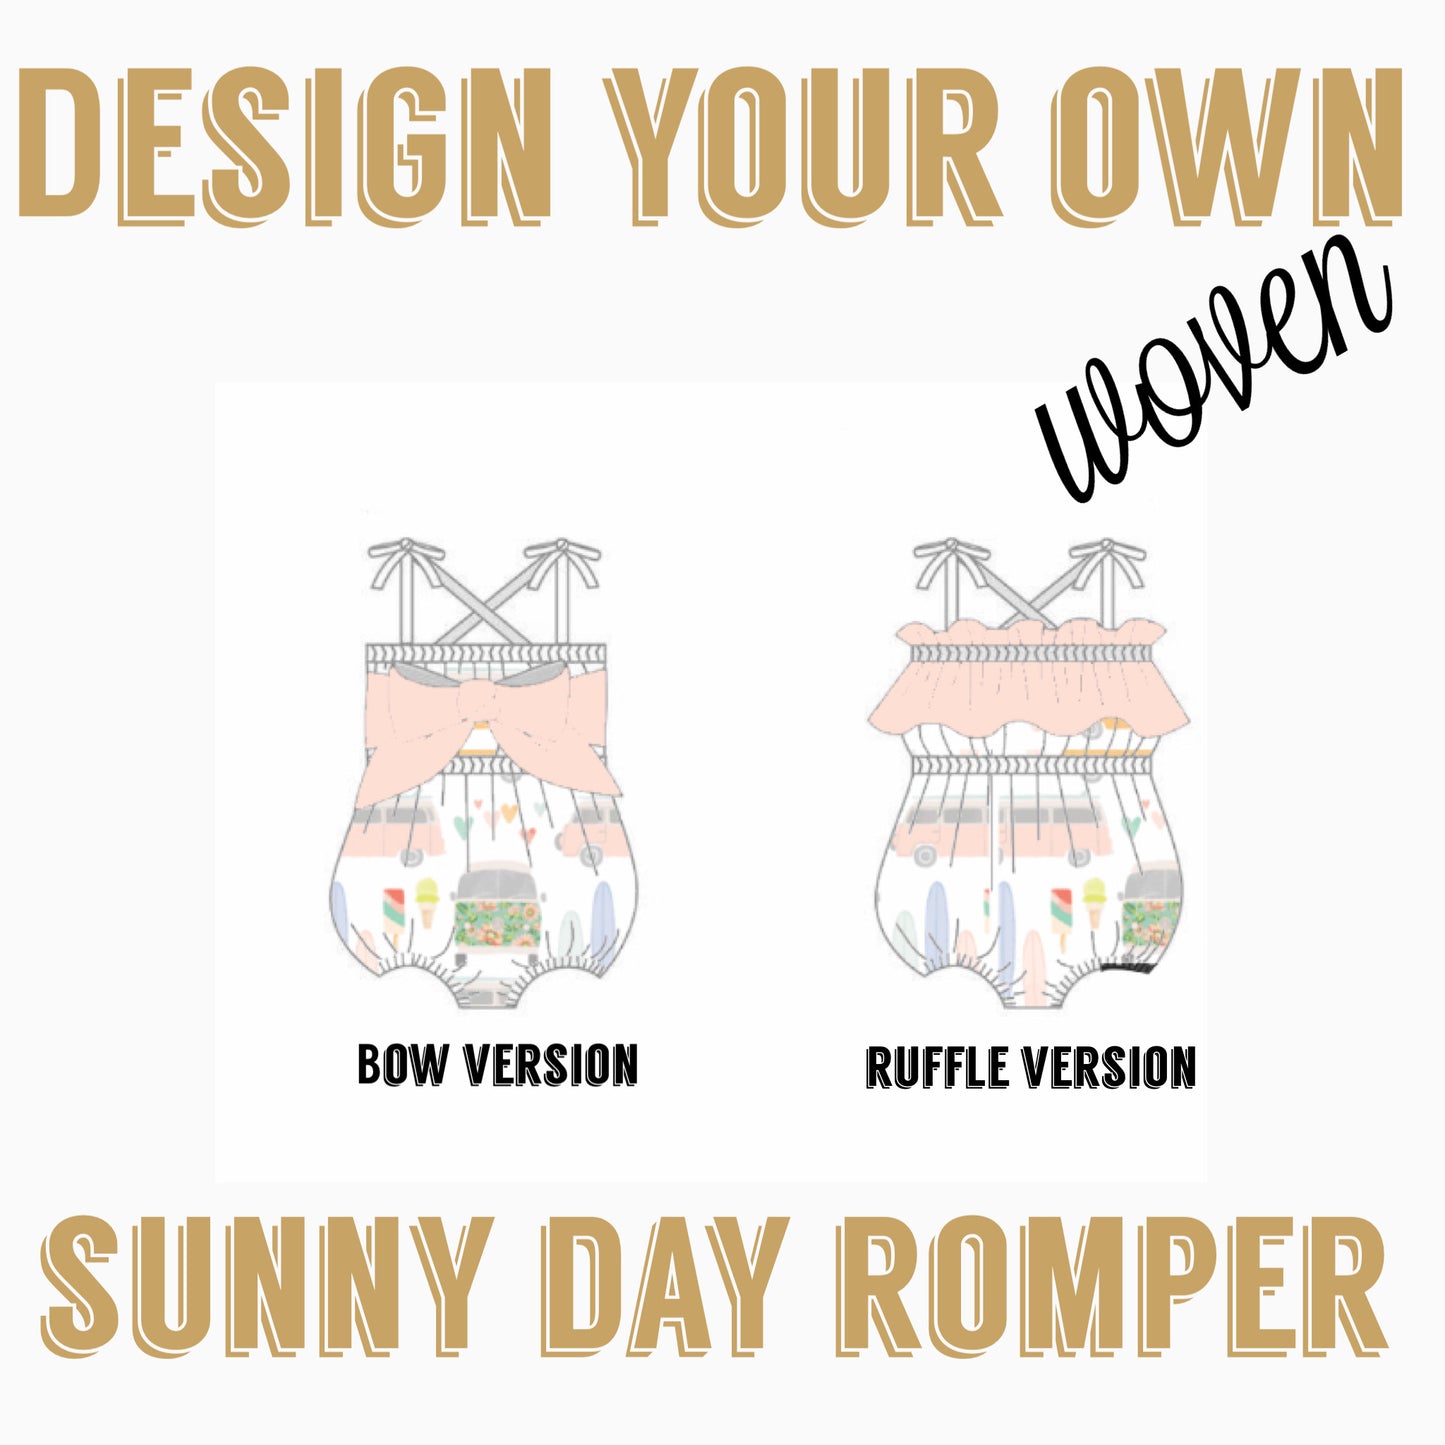 DESIGN YOUR OWN | WOVEN SUNNY DAY ROMPER